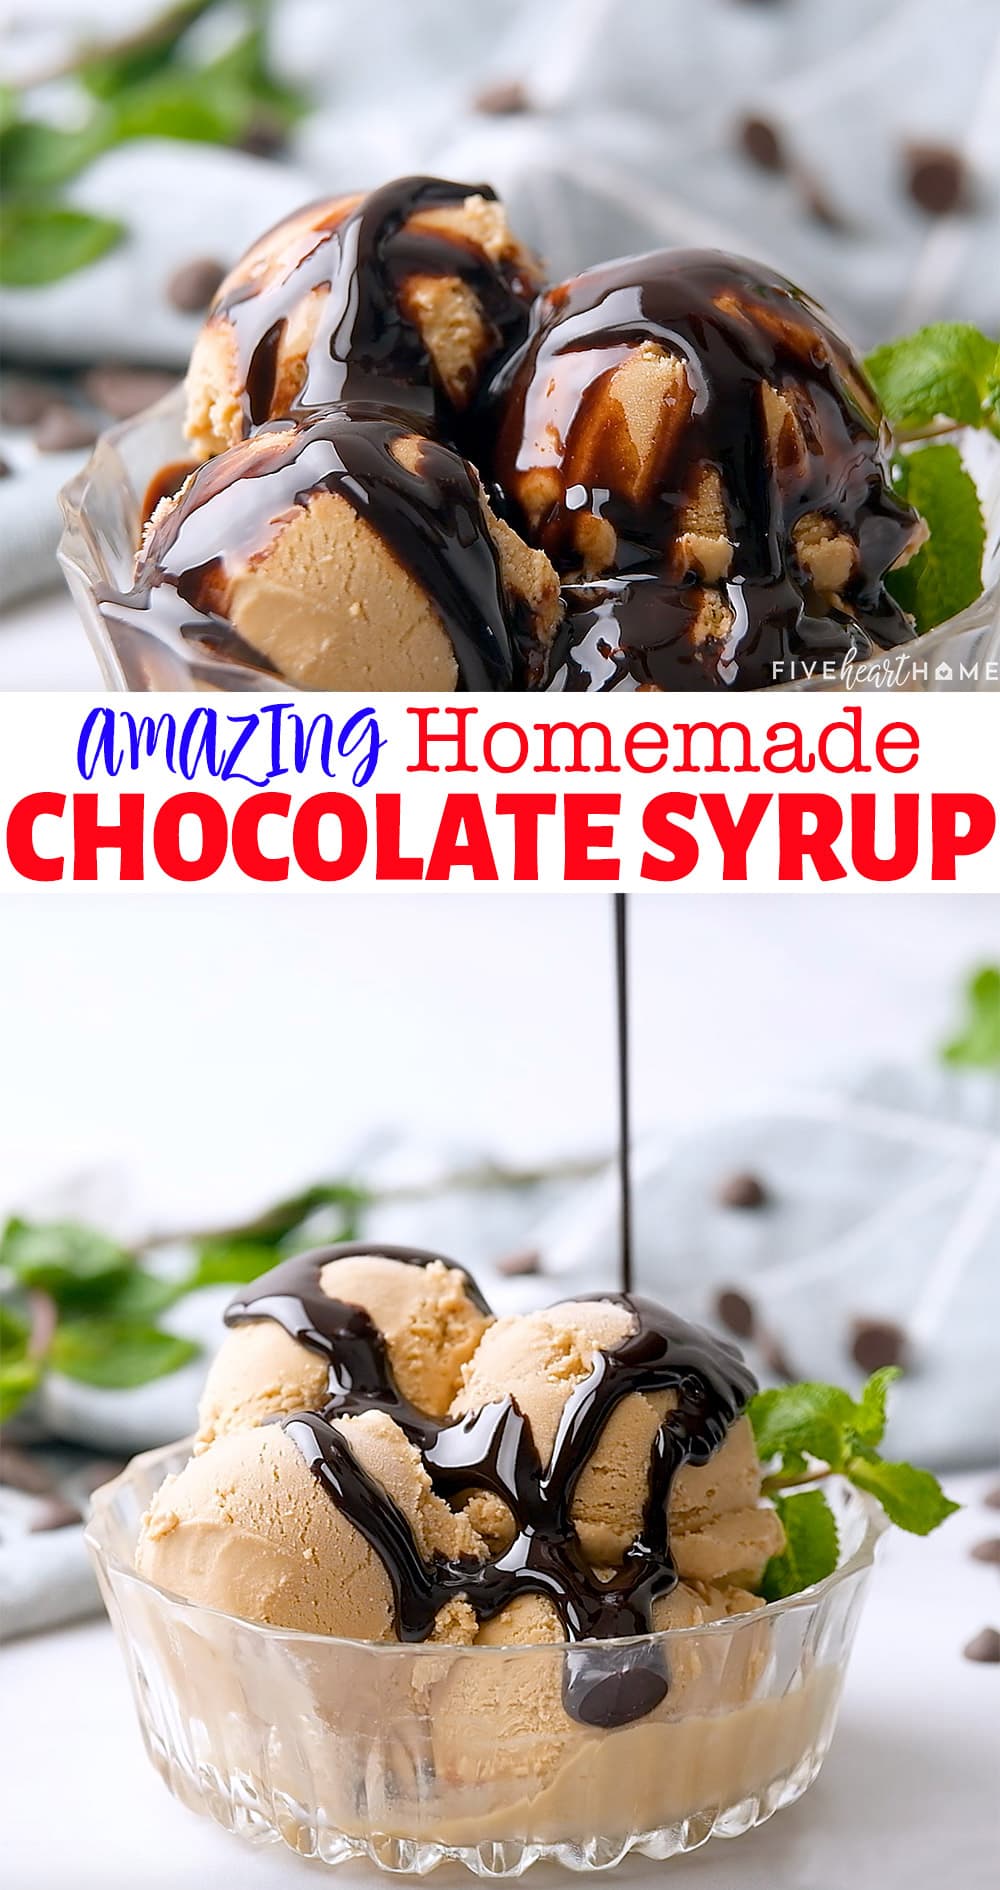 The BEST Homemade Chocolate Syrup ~ this easy chocolate syrup recipe is made with five natural ingredients in about five minutes. It is a scrumptious topping for ice cream and makes perfect chocolate milk. And since it's made with simple ingredients, it's economical AND you don't have to worry about the additives and preservatives found in many store-bought brands! | FiveHeartHome.com via @fivehearthome